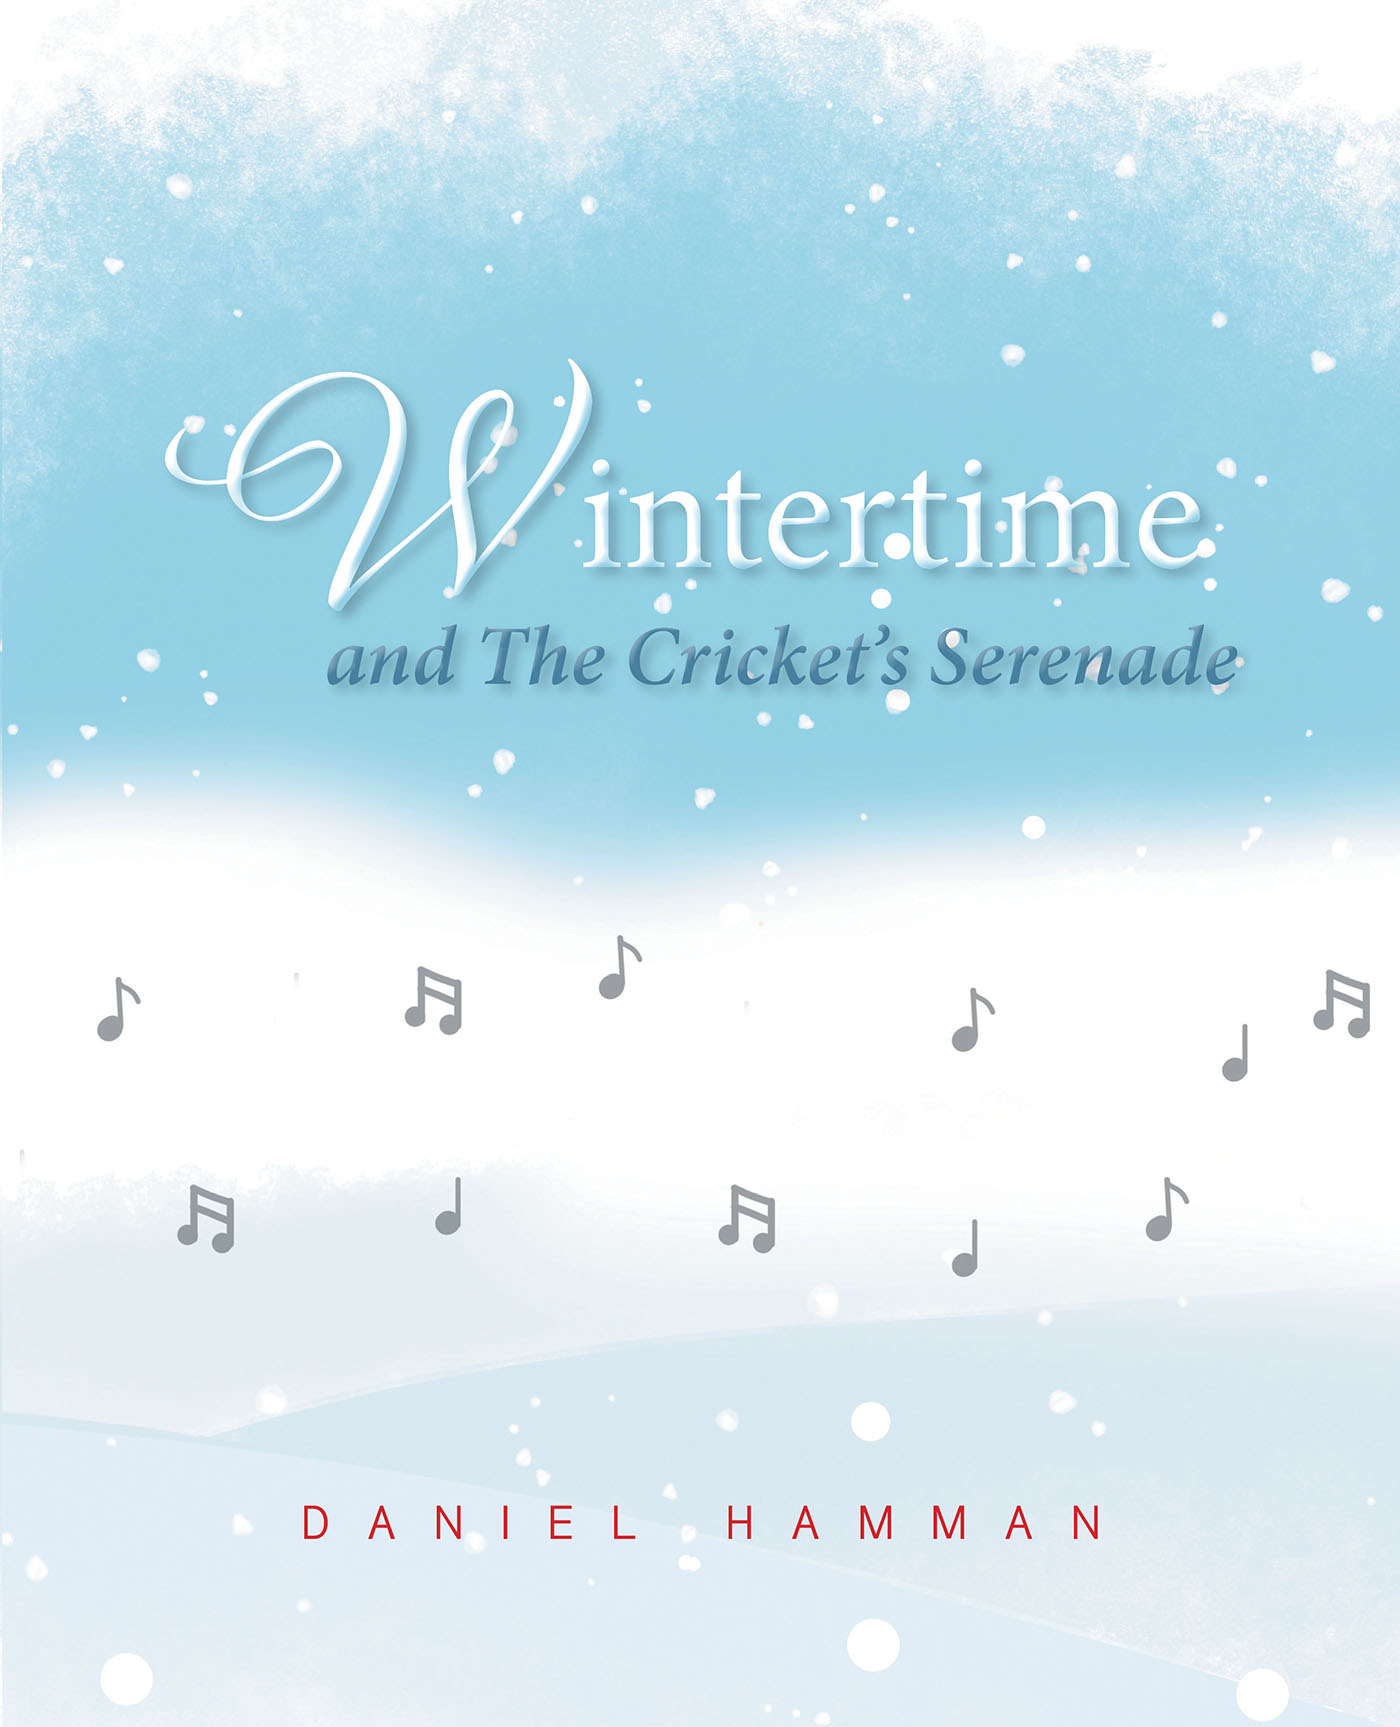 Author Daniel Hamman’s New Book, “Wintertime and The Cricket’s Serenade,” Emphasizes the Value of the Relationship Between Grandparents and Grandchildren